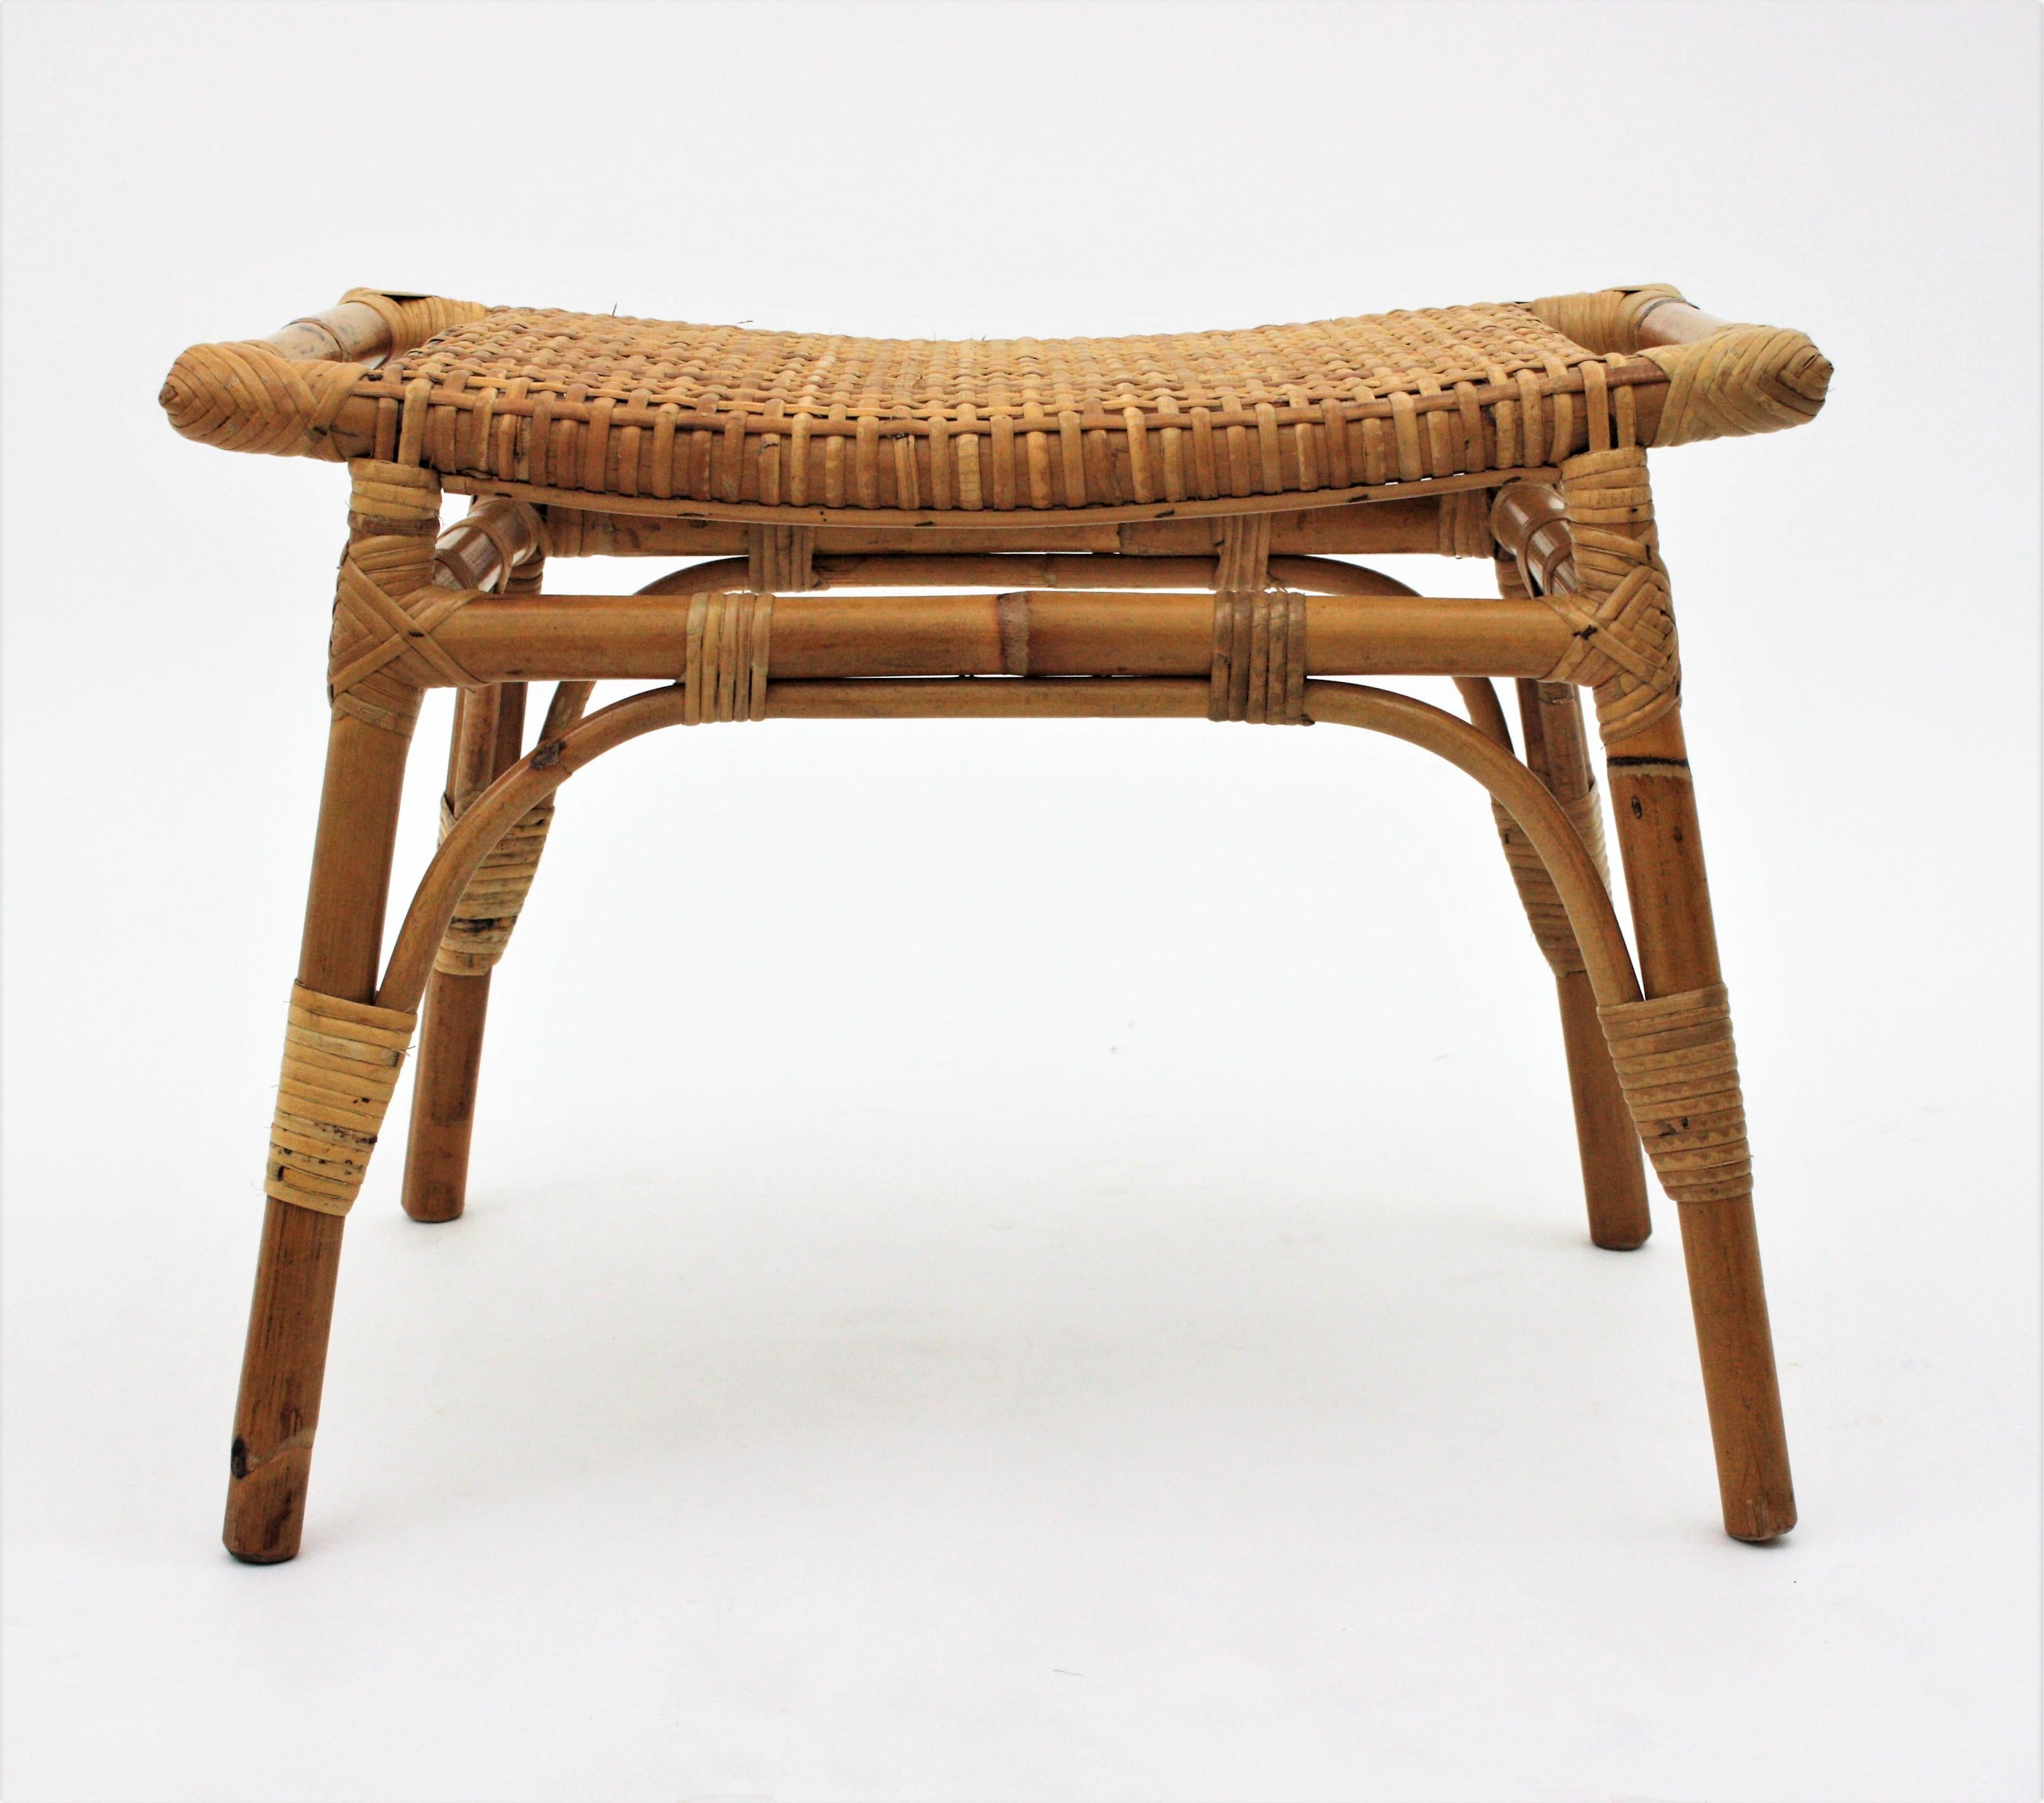 Pair of Bamboo Stools, Benches or Ottoman with Woven Wicker Cane Seats 5